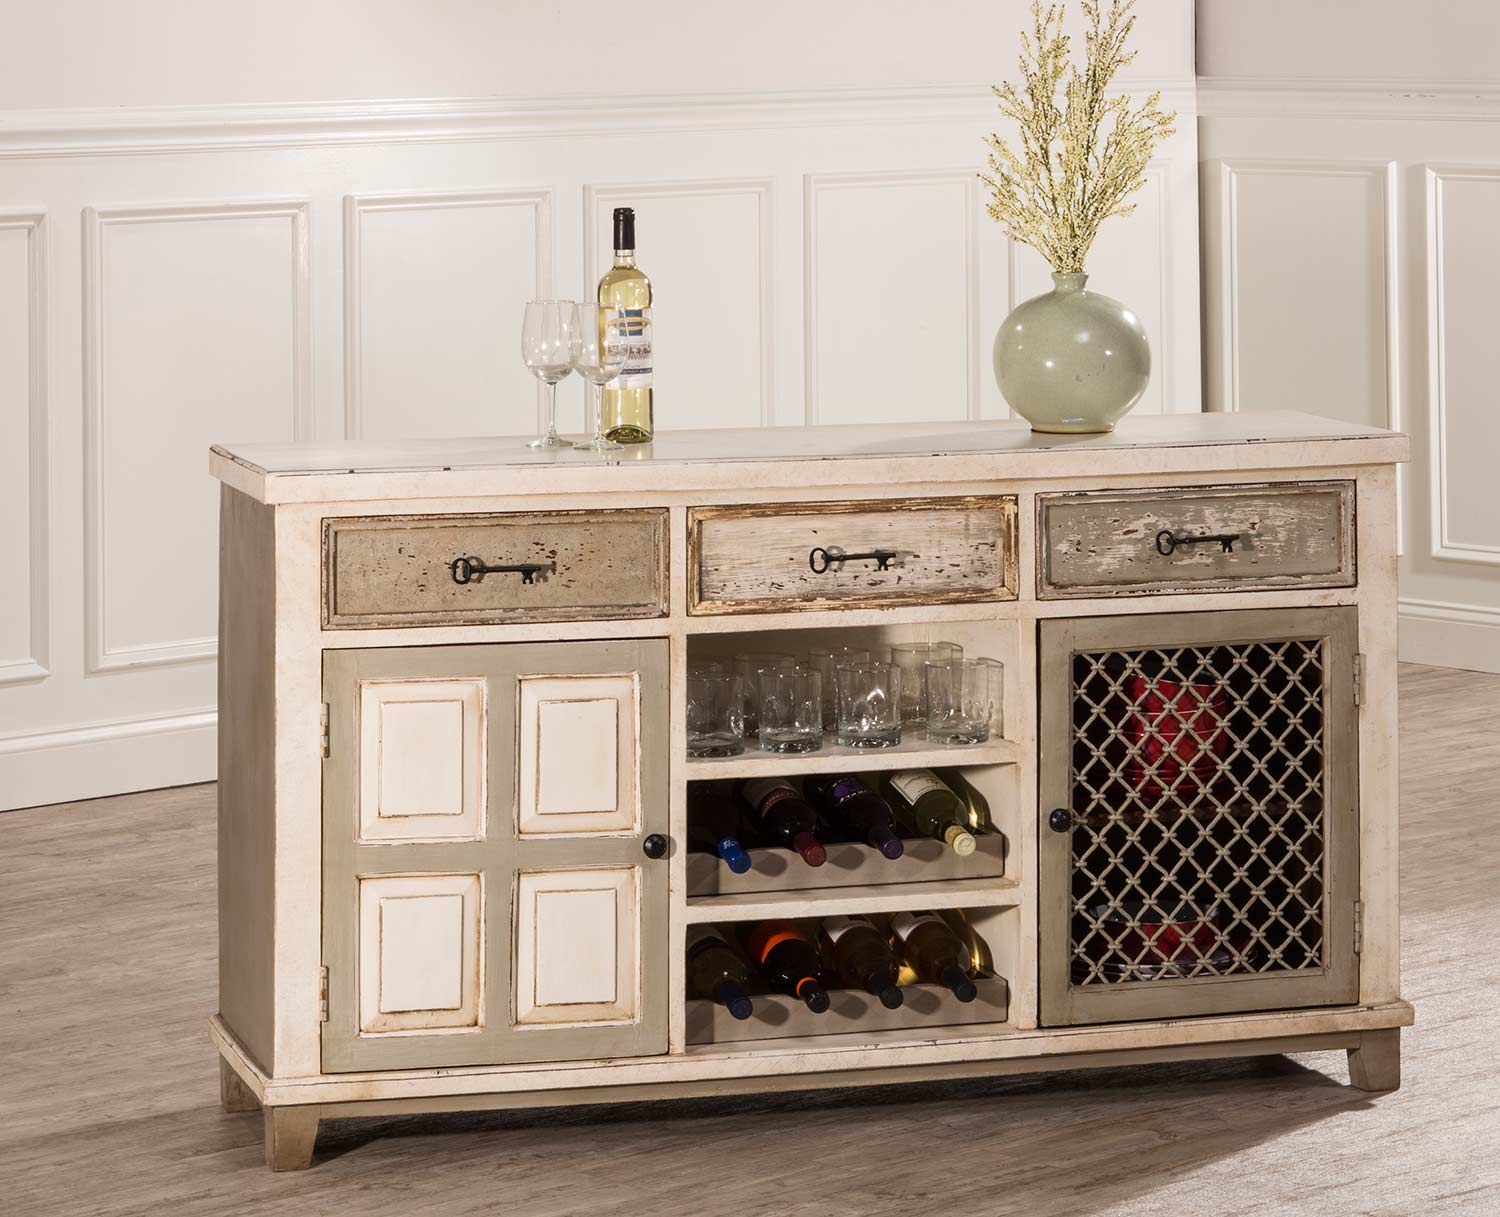 Hillsdale LaRose Console Table with 2 Door Storage and Wine Rack - Handpainted White/Gray